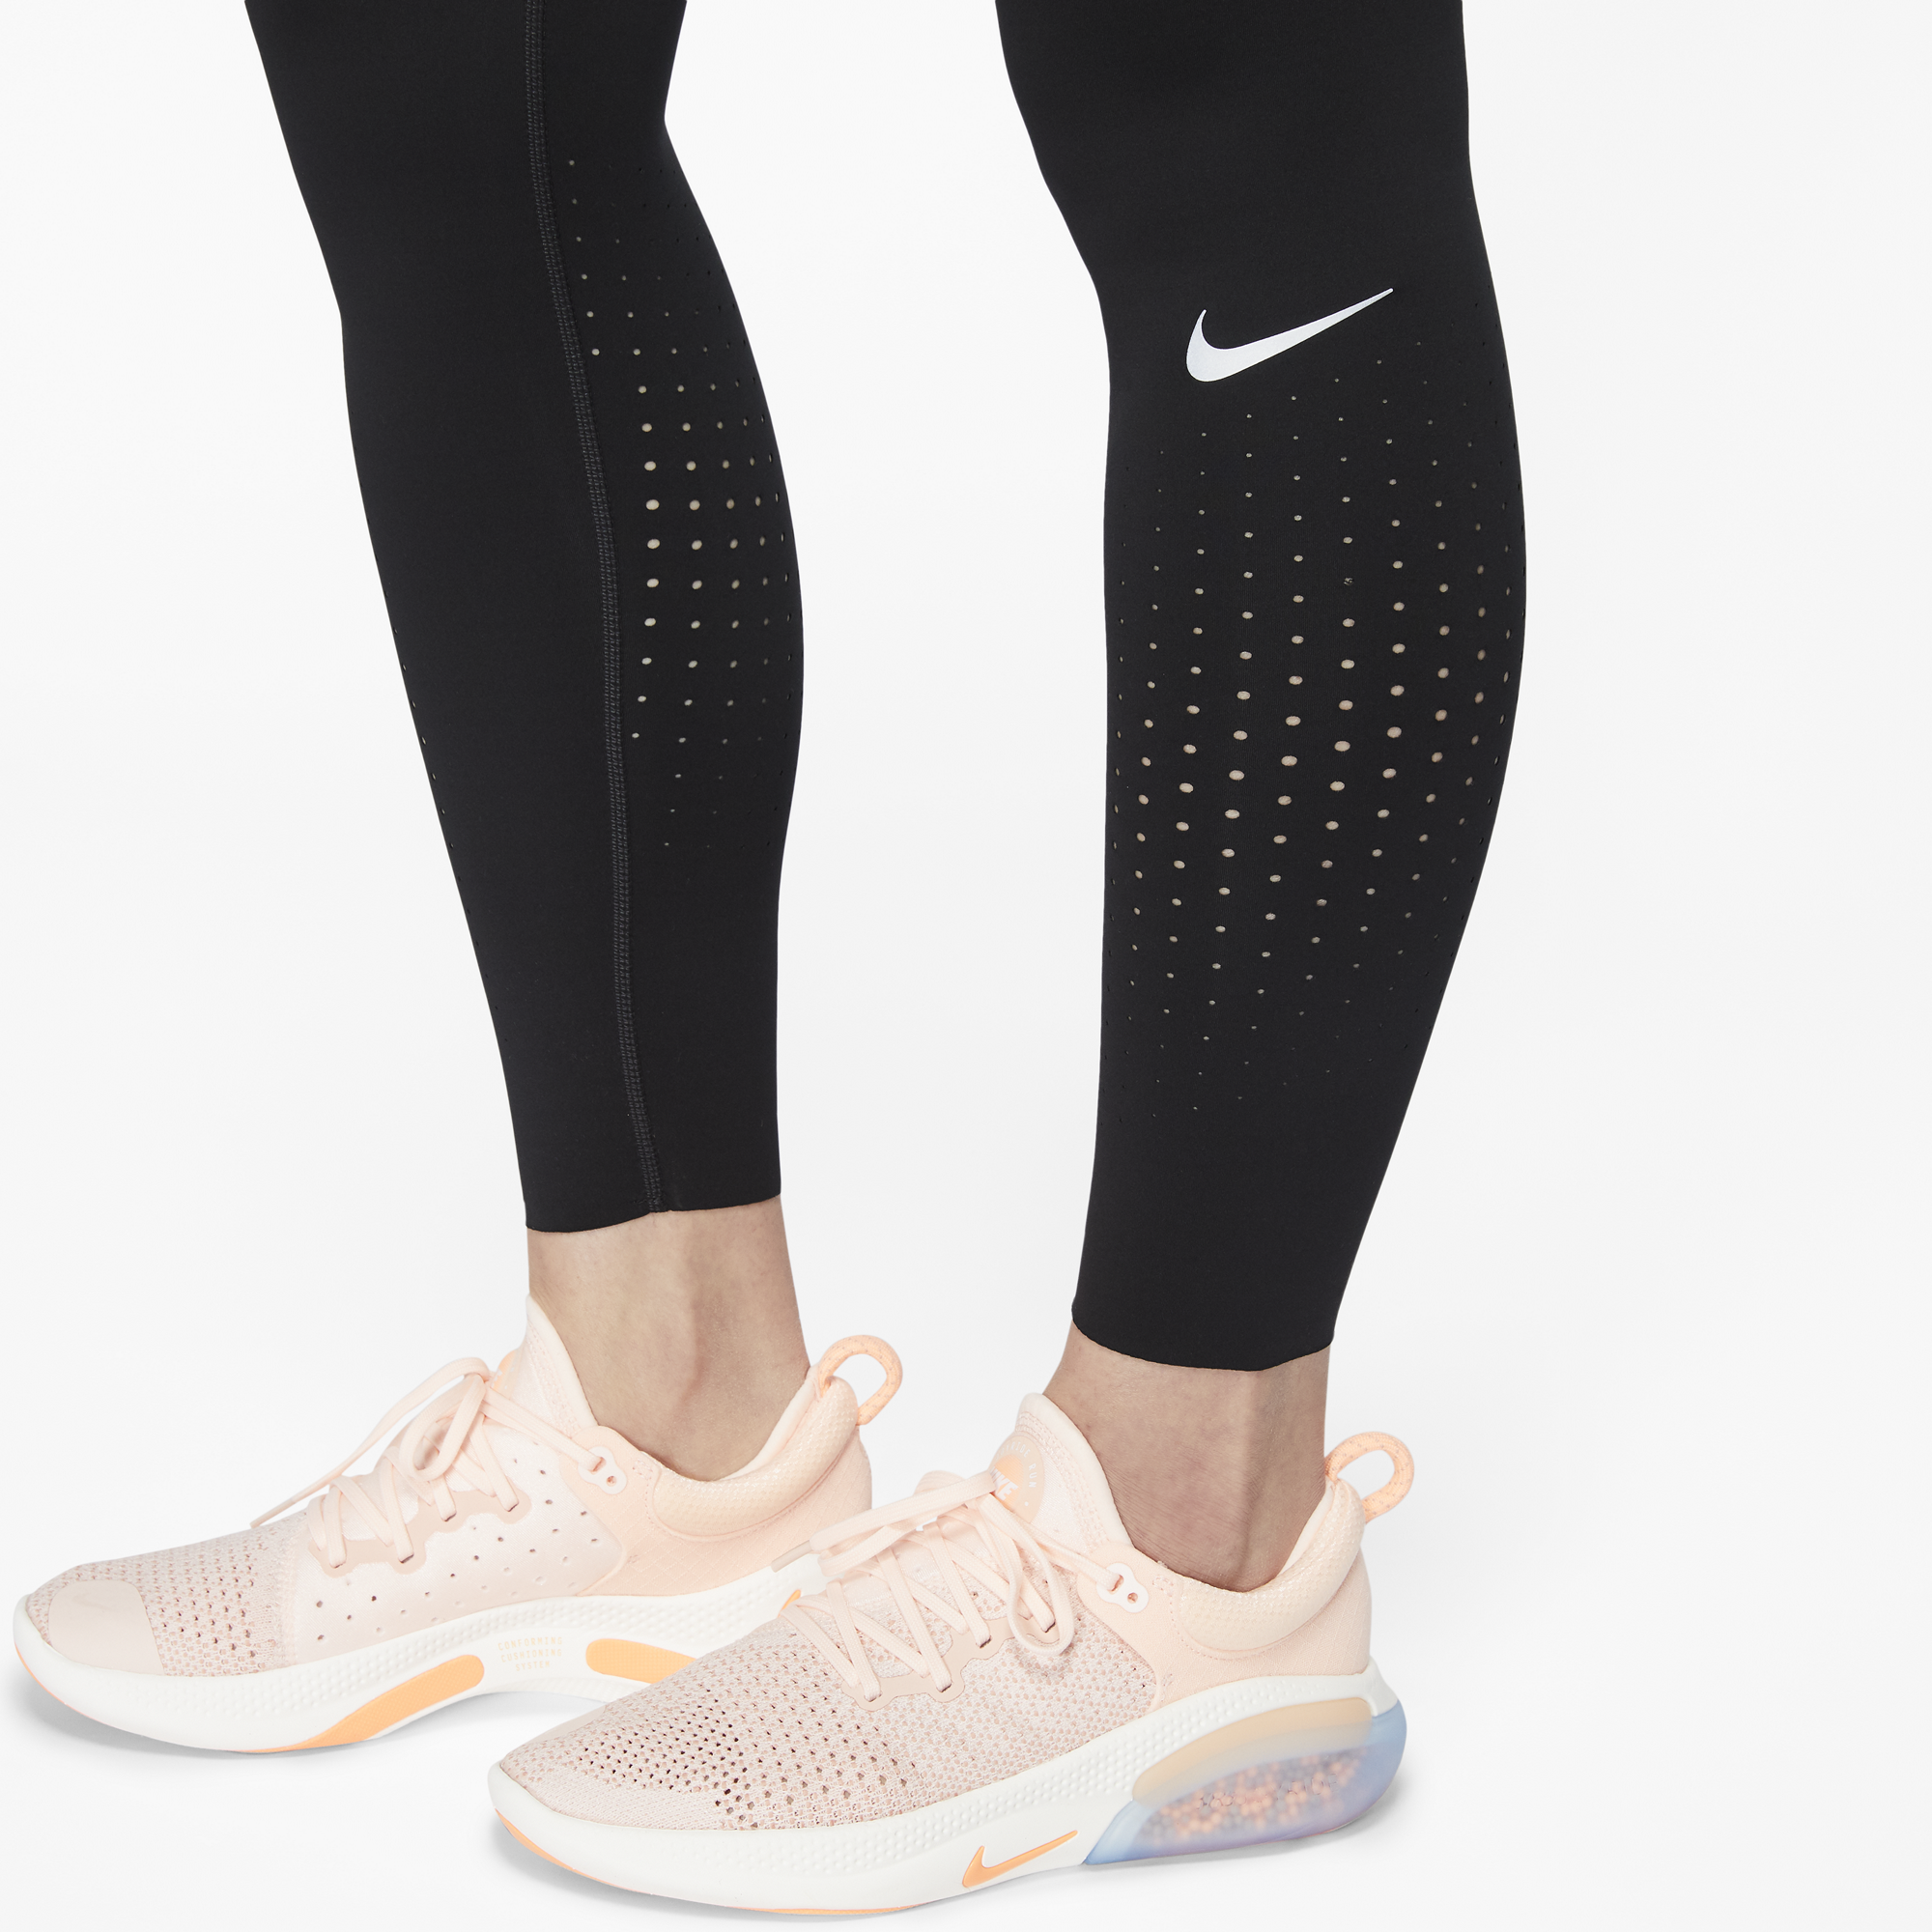 Women's Epic Luxe Mid-Rise Leggings – Running Company